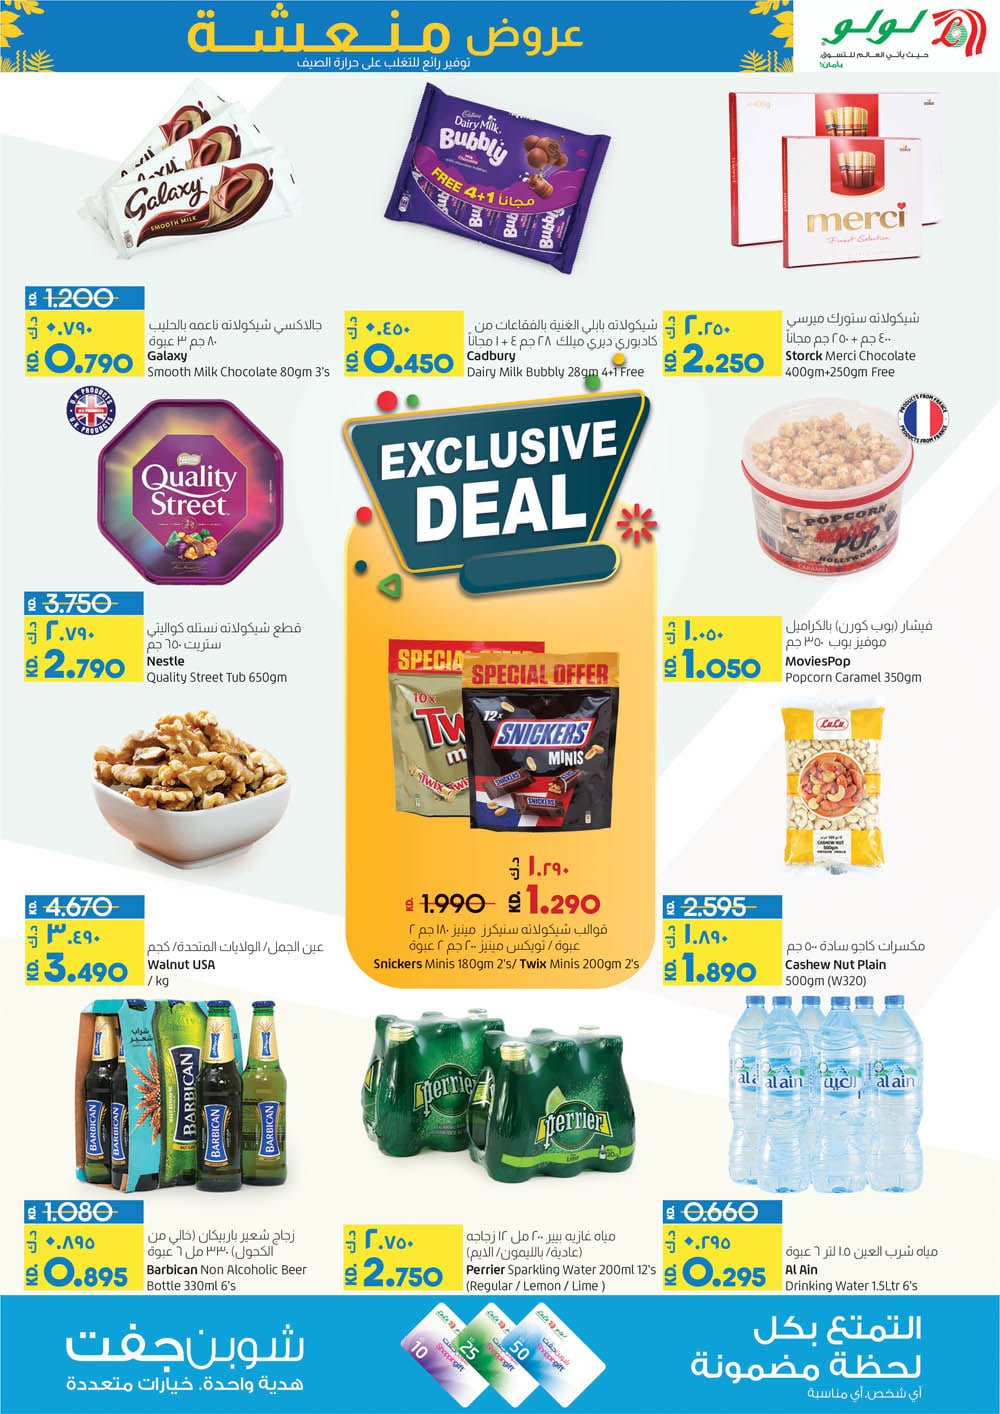 Lulu Hypermarket Chilled Offers, iiQ8 weekly promotions 6